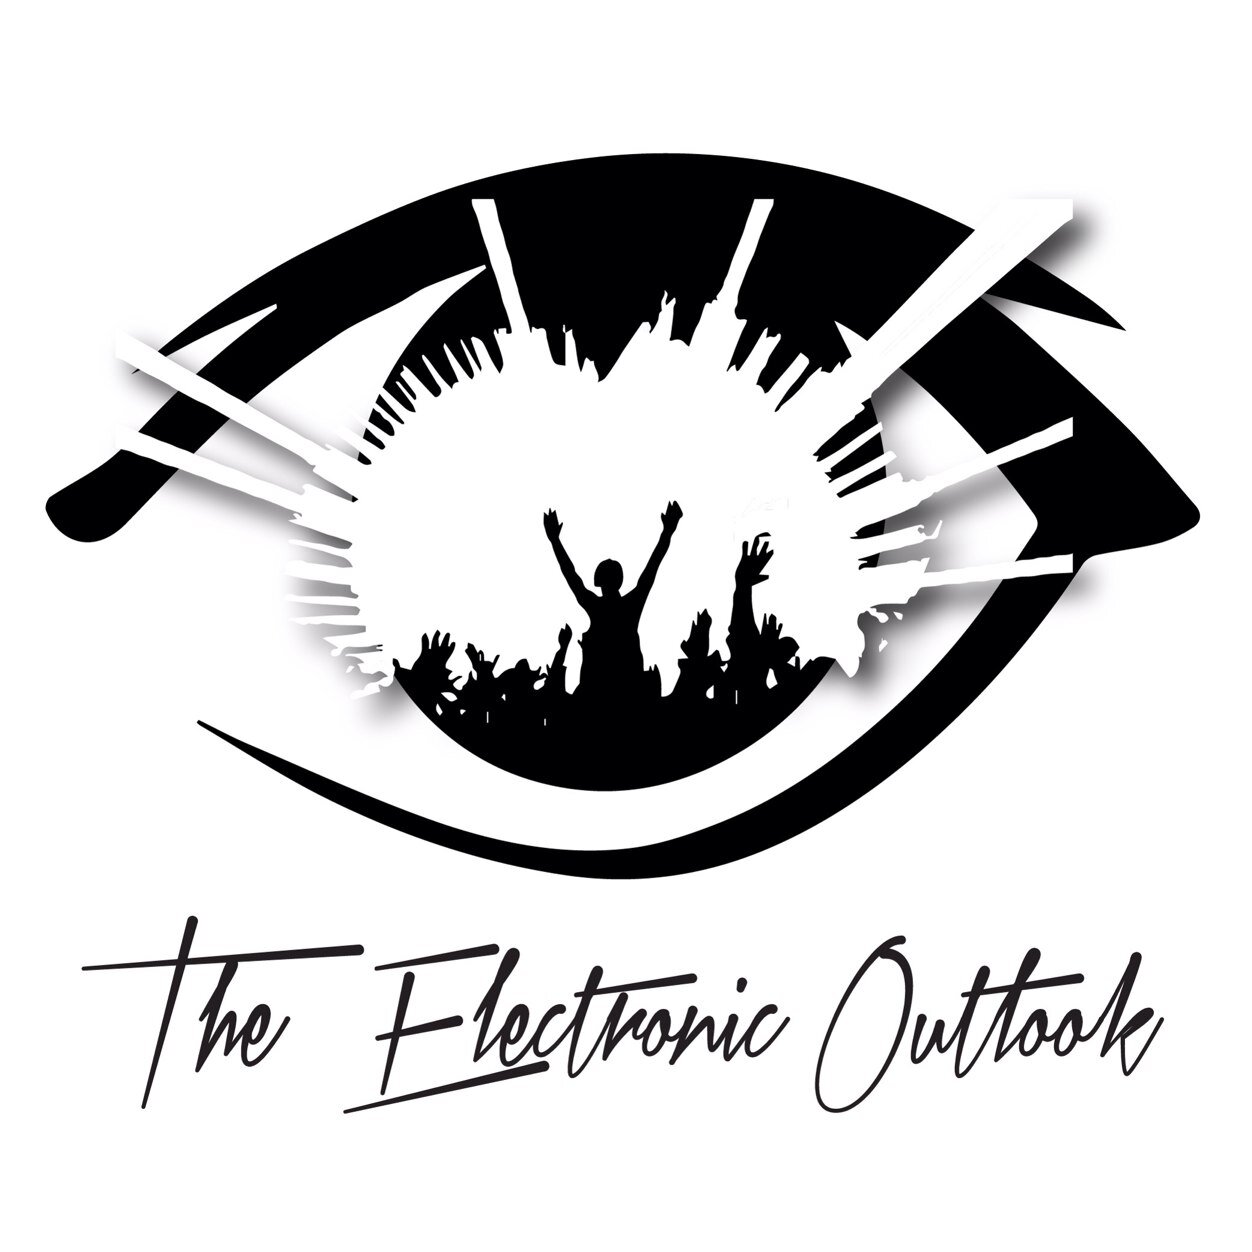 Capturing a new perspective to Electronic Dance Music:  http://t.co/oG8iwb1sRX

For inquiries please email us at info@theelectronicoutlook.com